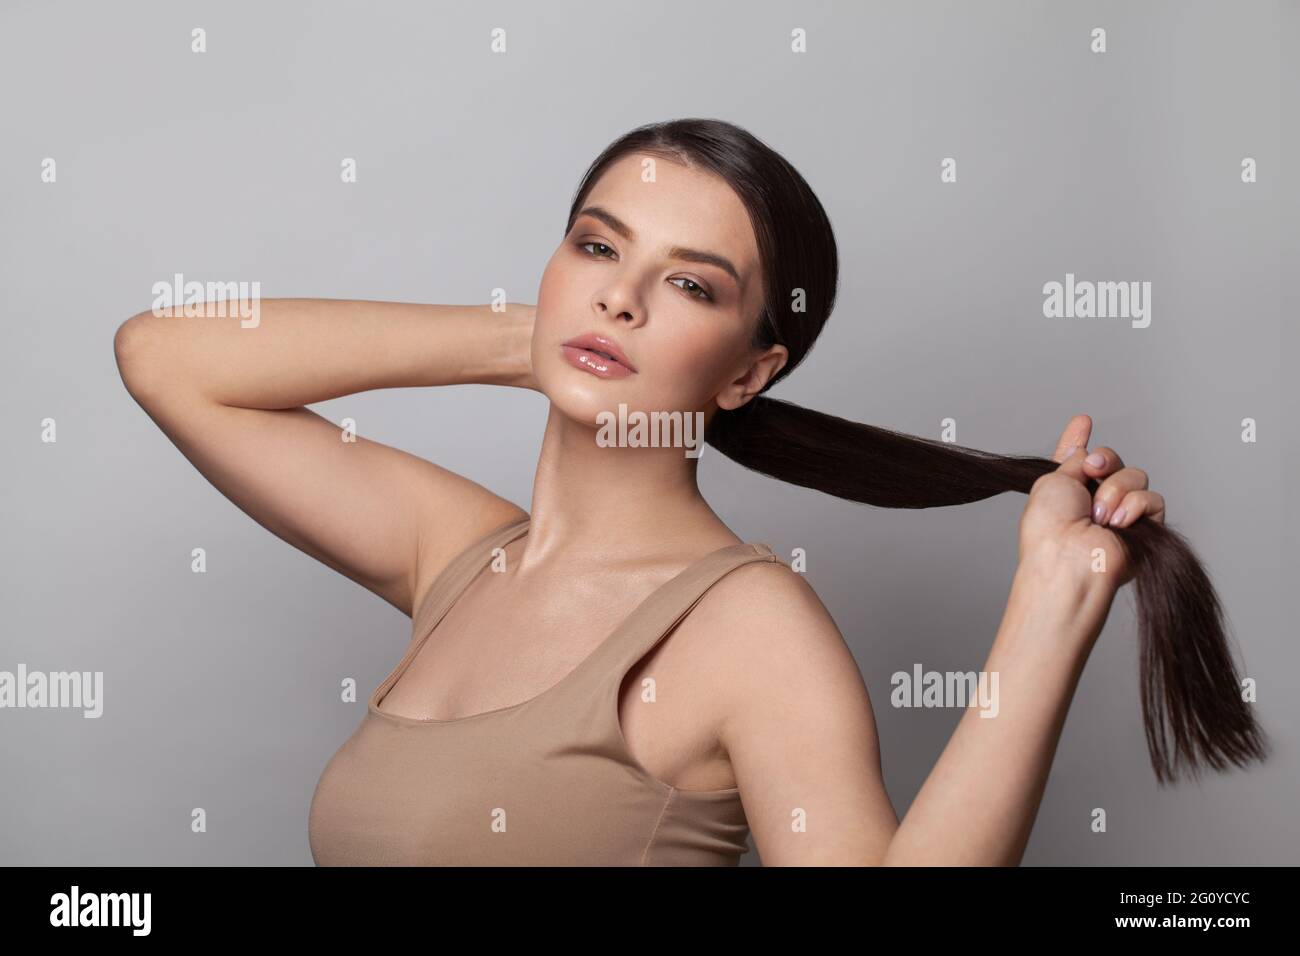 Beautiful young woman touching her ponytail hairstyle with smooth straight  hair Stock Photo - Alamy